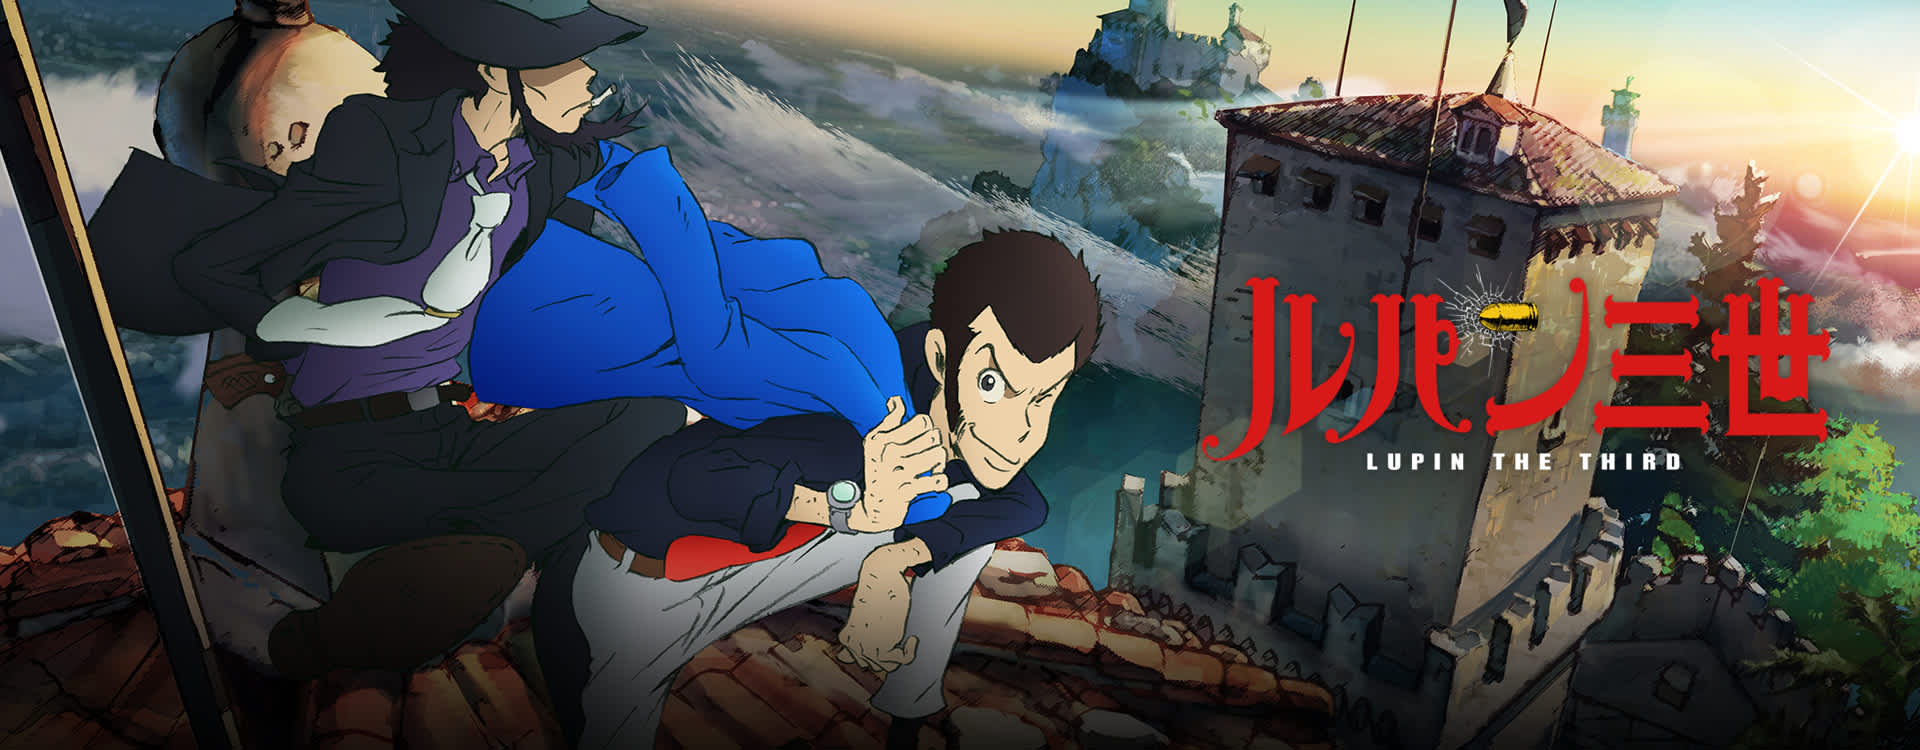 Lupin The 3rd Part4 - Lupin The Third Part 4 , HD Wallpaper & Backgrounds